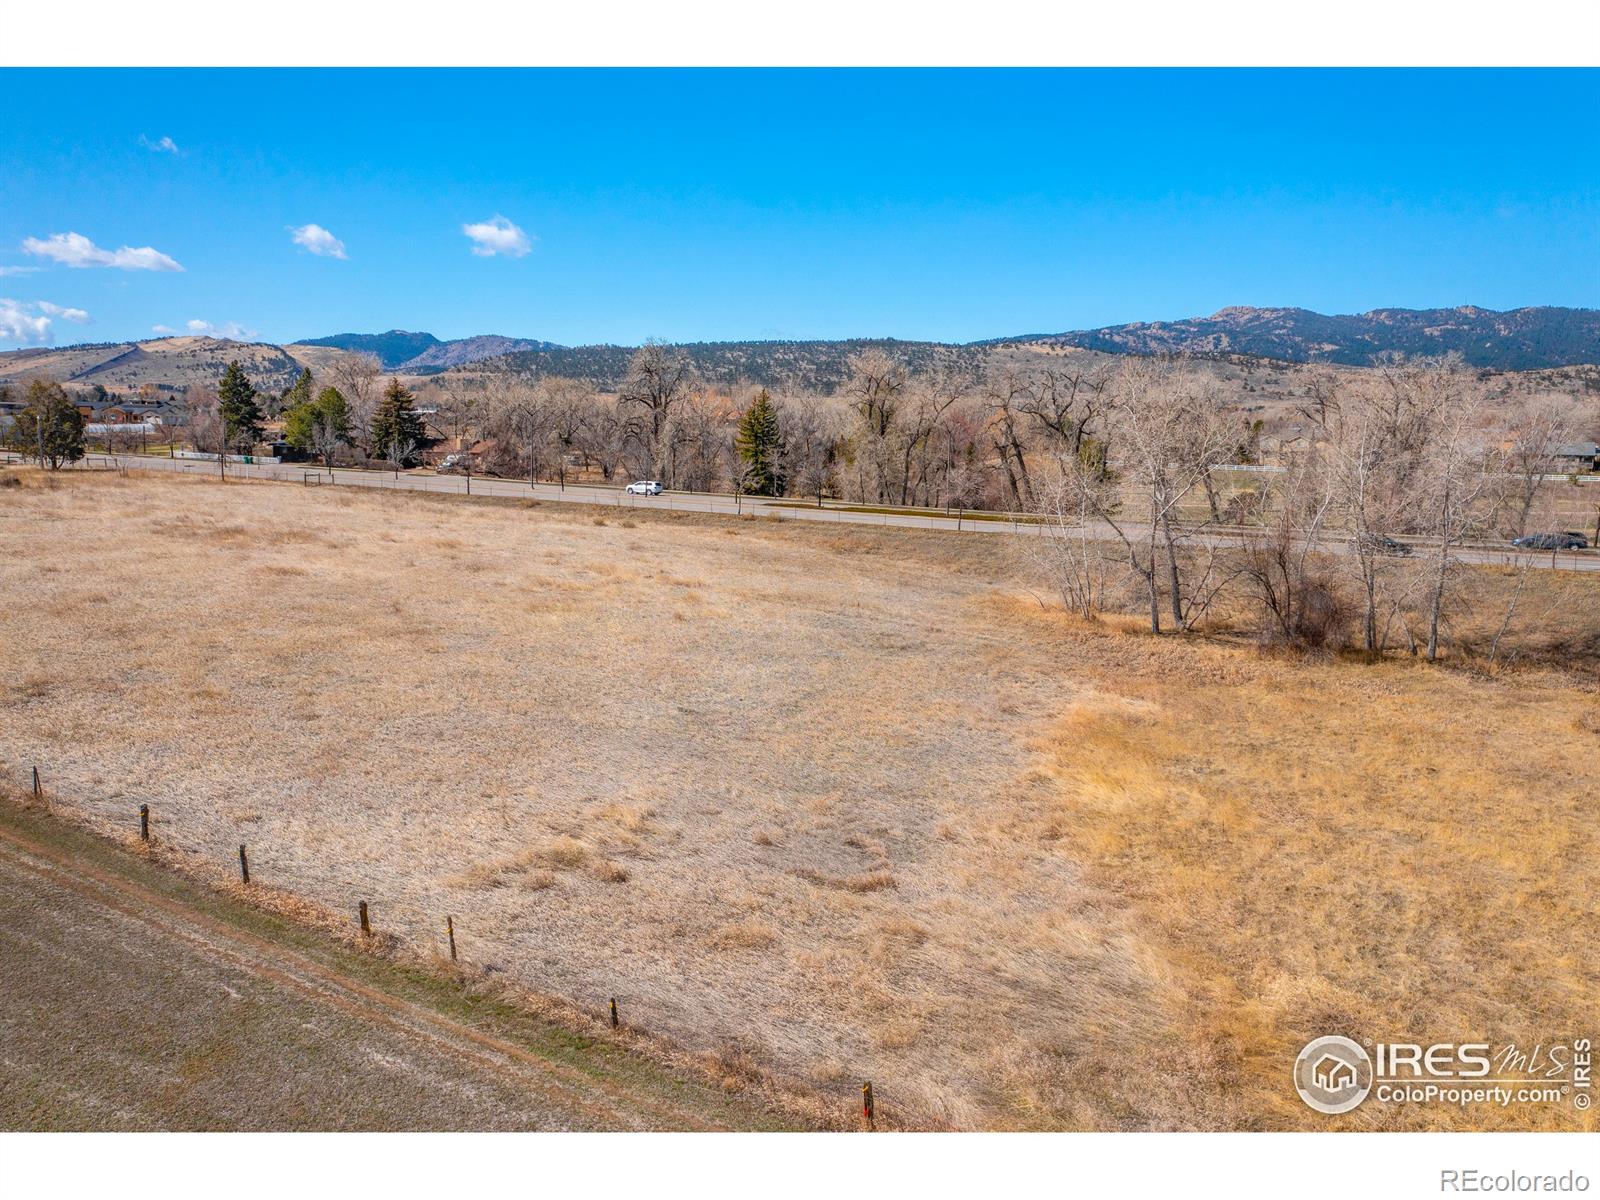 2800 Taft Hill, Fort Collins, CO